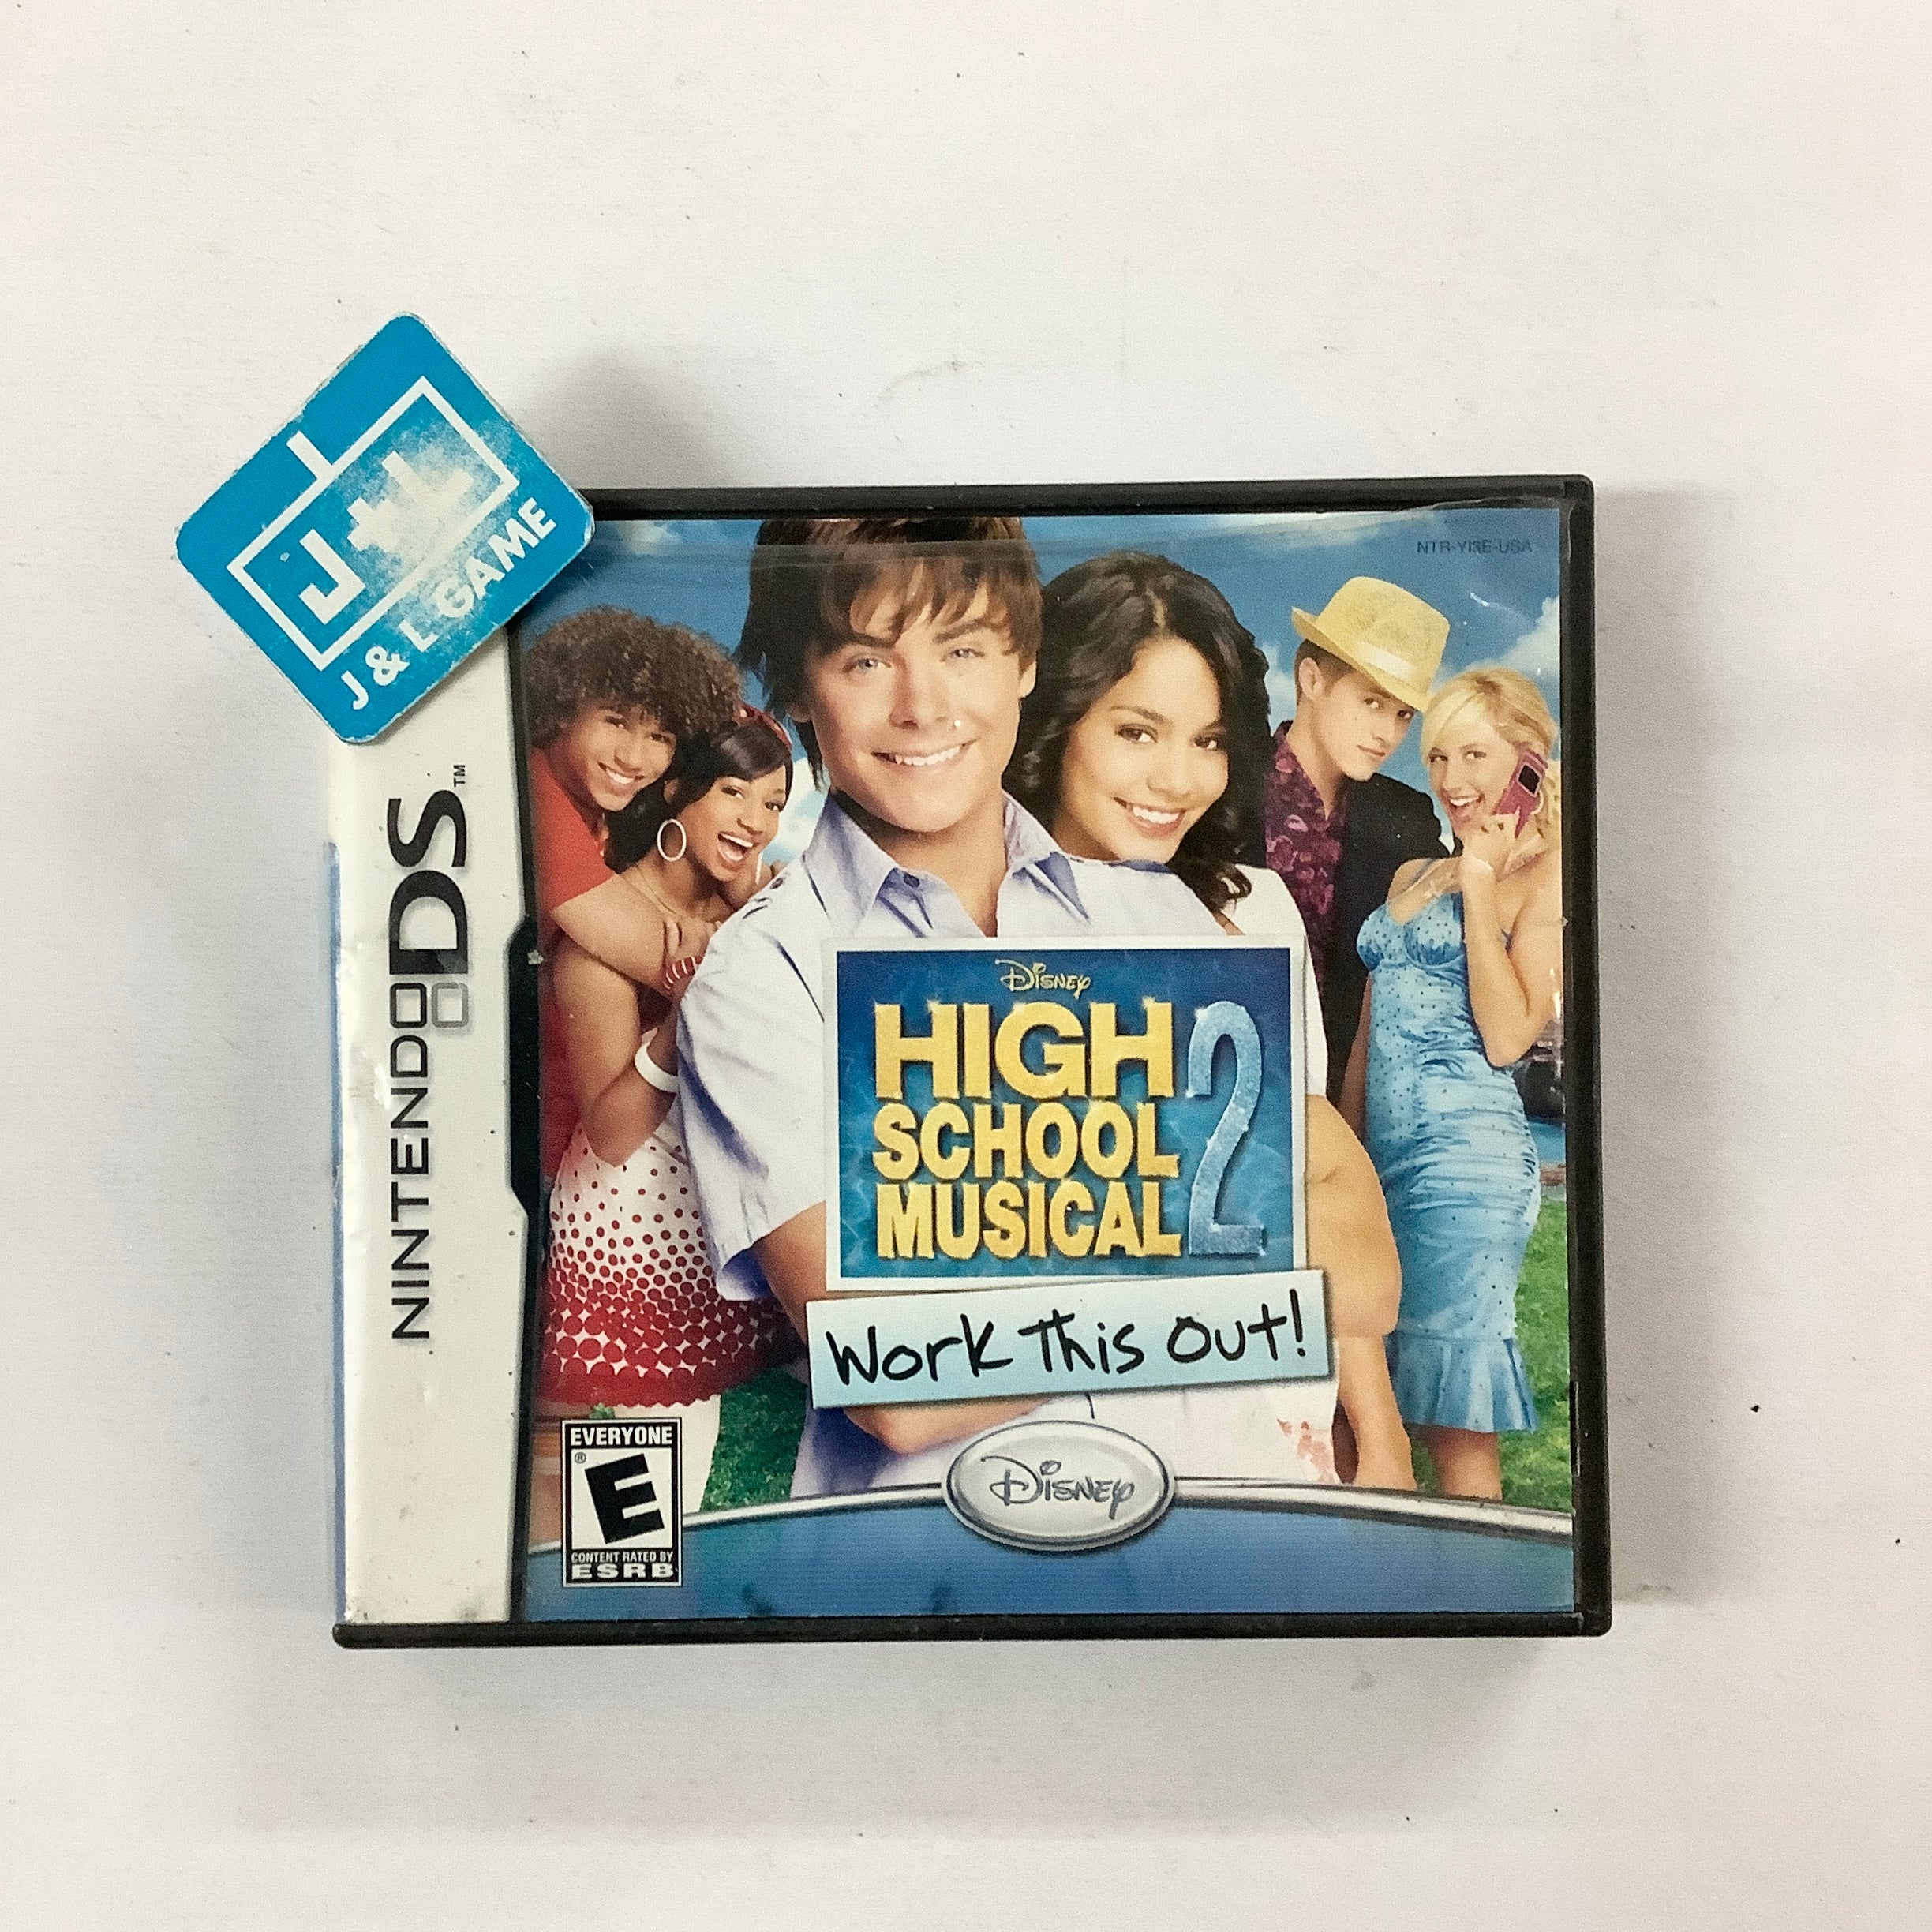 Disney High School Musical 2: Work This Out! - (NDS) Nintendo DS [Pre-Owned] Video Games Disney Interactive Studios   